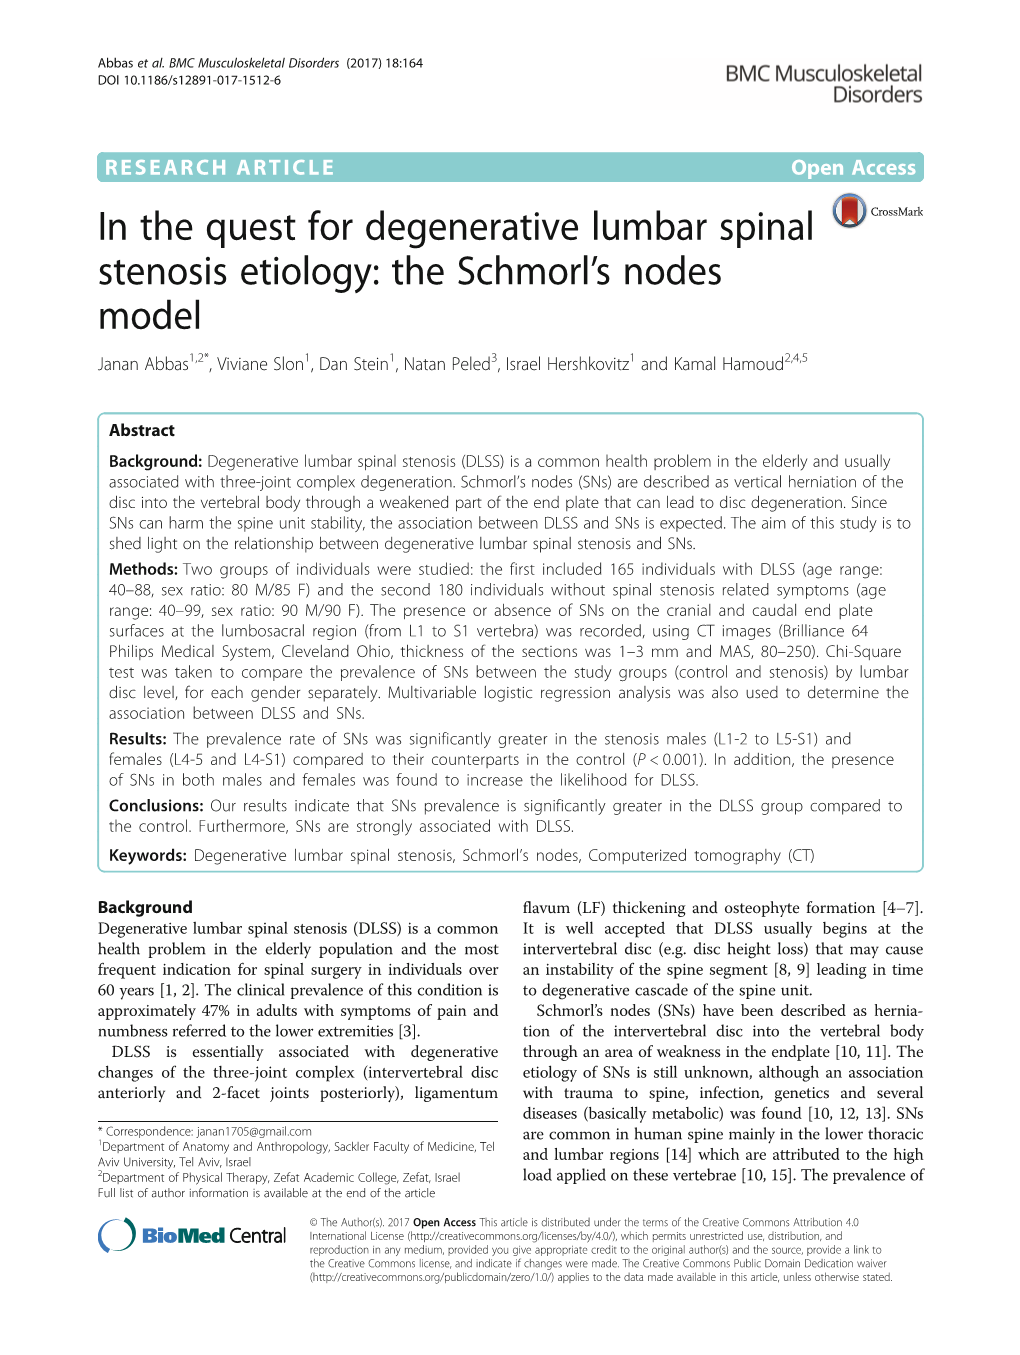 In the Quest for Degenerative Lumbar Spinal Stenosis Etiology